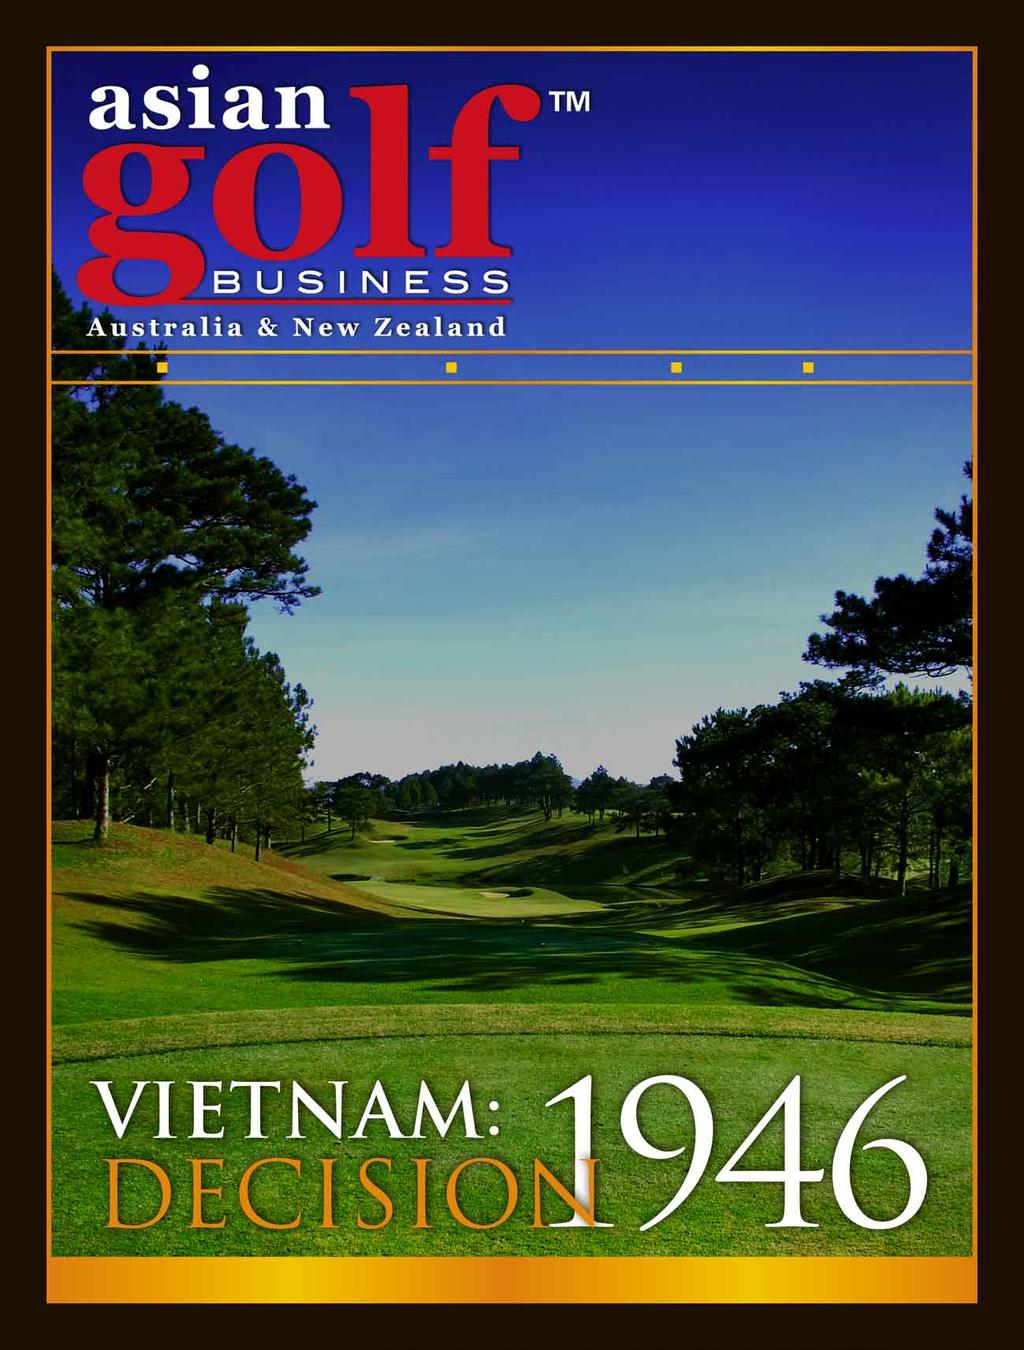 Issue #20 March 2010 www.asiangolfbusiness.com www.asiangolfmonthly.com www.golfconference.